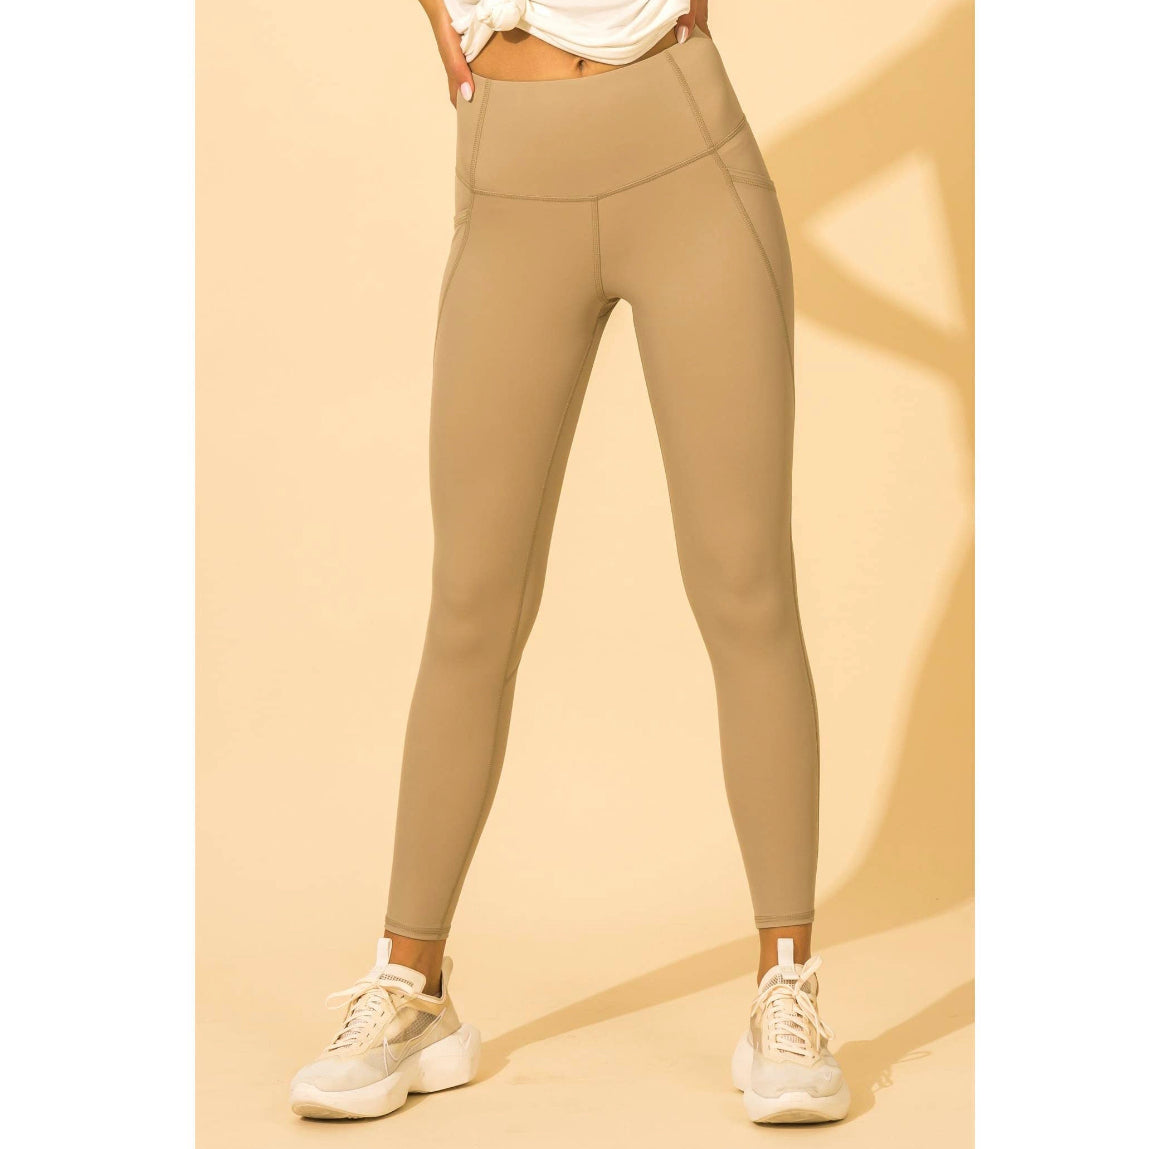 (Multiple Colors: Charcoal & Taupe) Out & About High Waisted Leggings